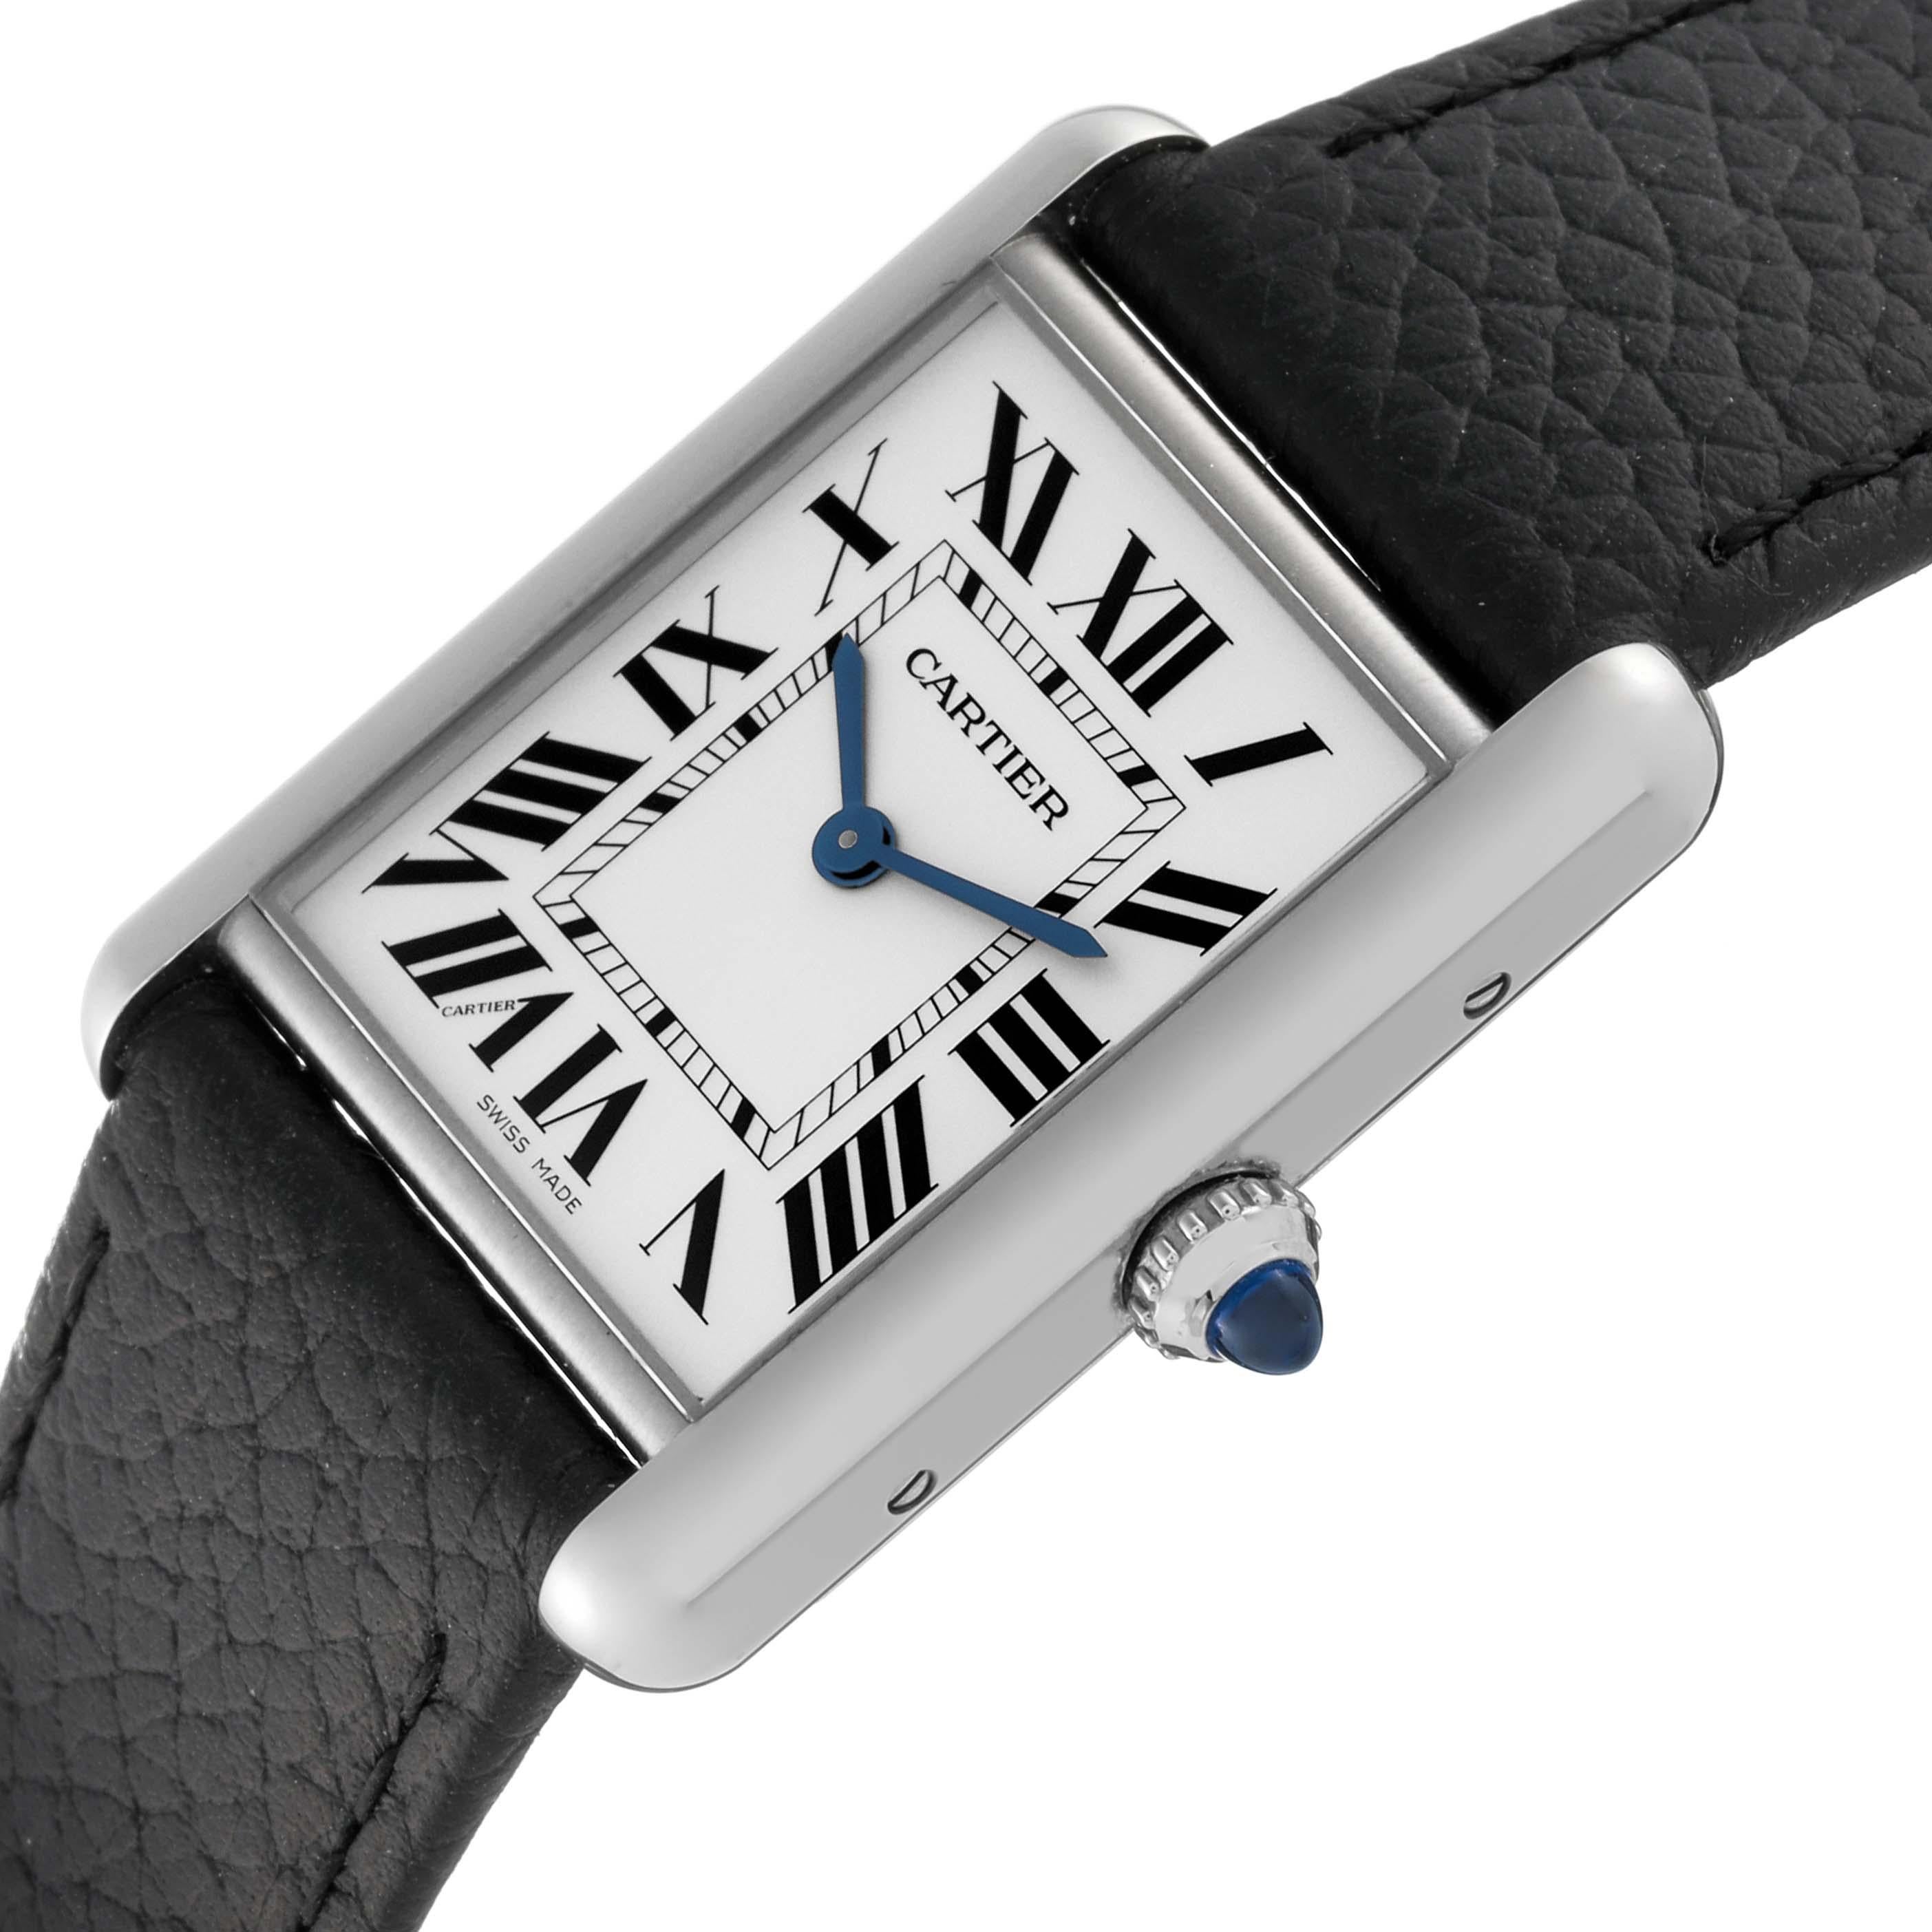 Cartier Tank Must Large Steel Silver Dial Ladies Watch WSTA0041 Box Card. Quartz movement. Stainless steel case 33.7 x 25.5 mm. Circular grained crown set with the blue spinel cabochon. . Scratch resistant sapphire crystal. Silver dial with black